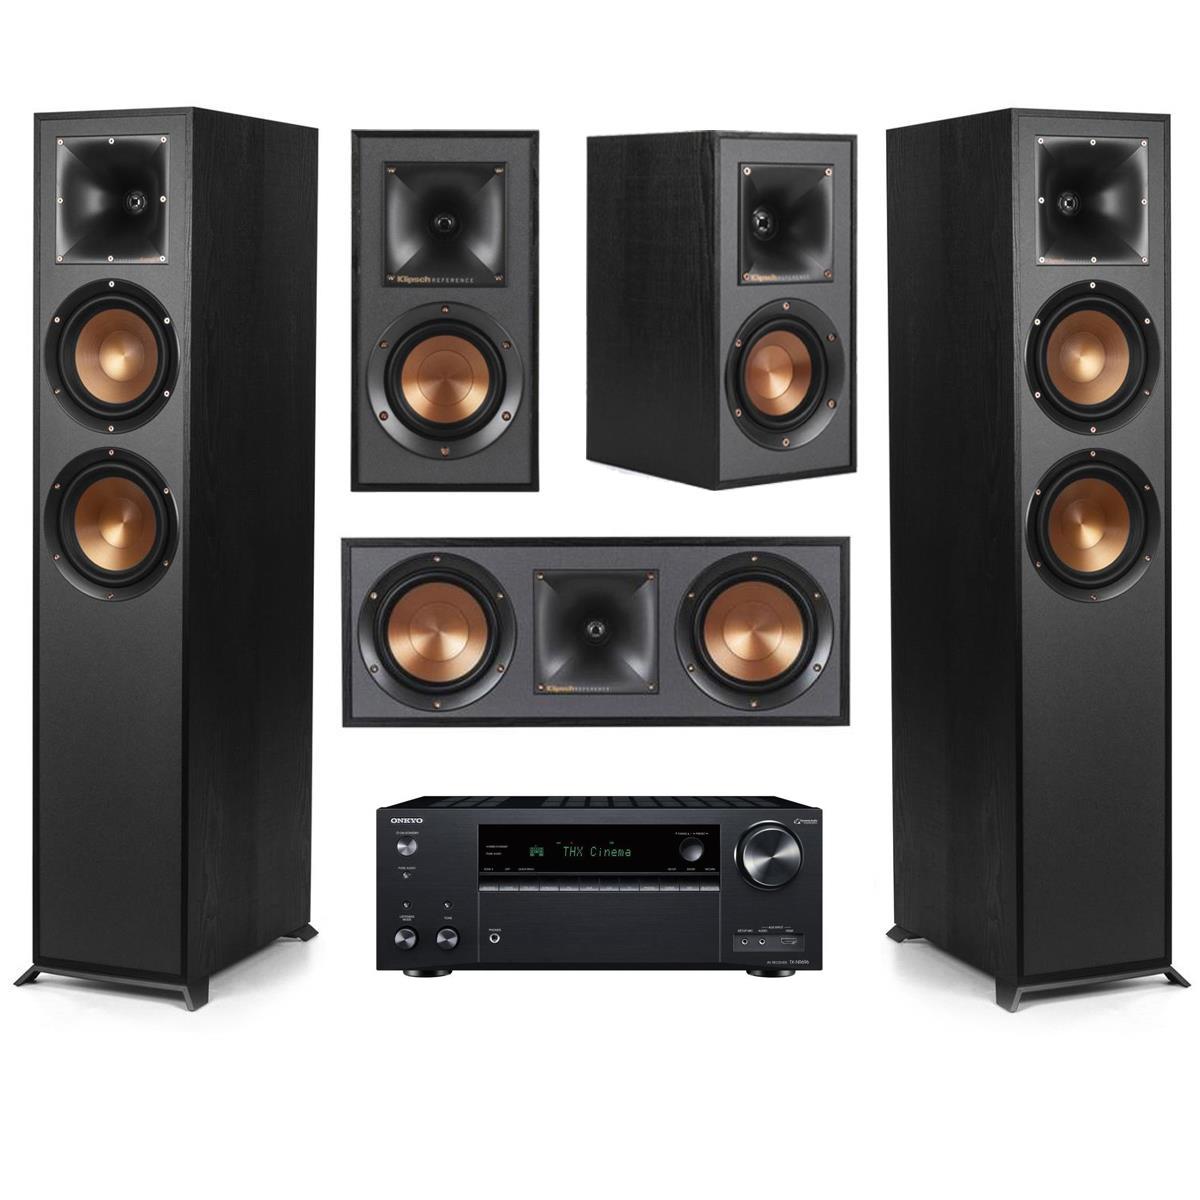 Klipsch Reference 5.0 Home Theater System, Black w/ Denon AVR-S970H 7.2 Receiver -  1065834 K5